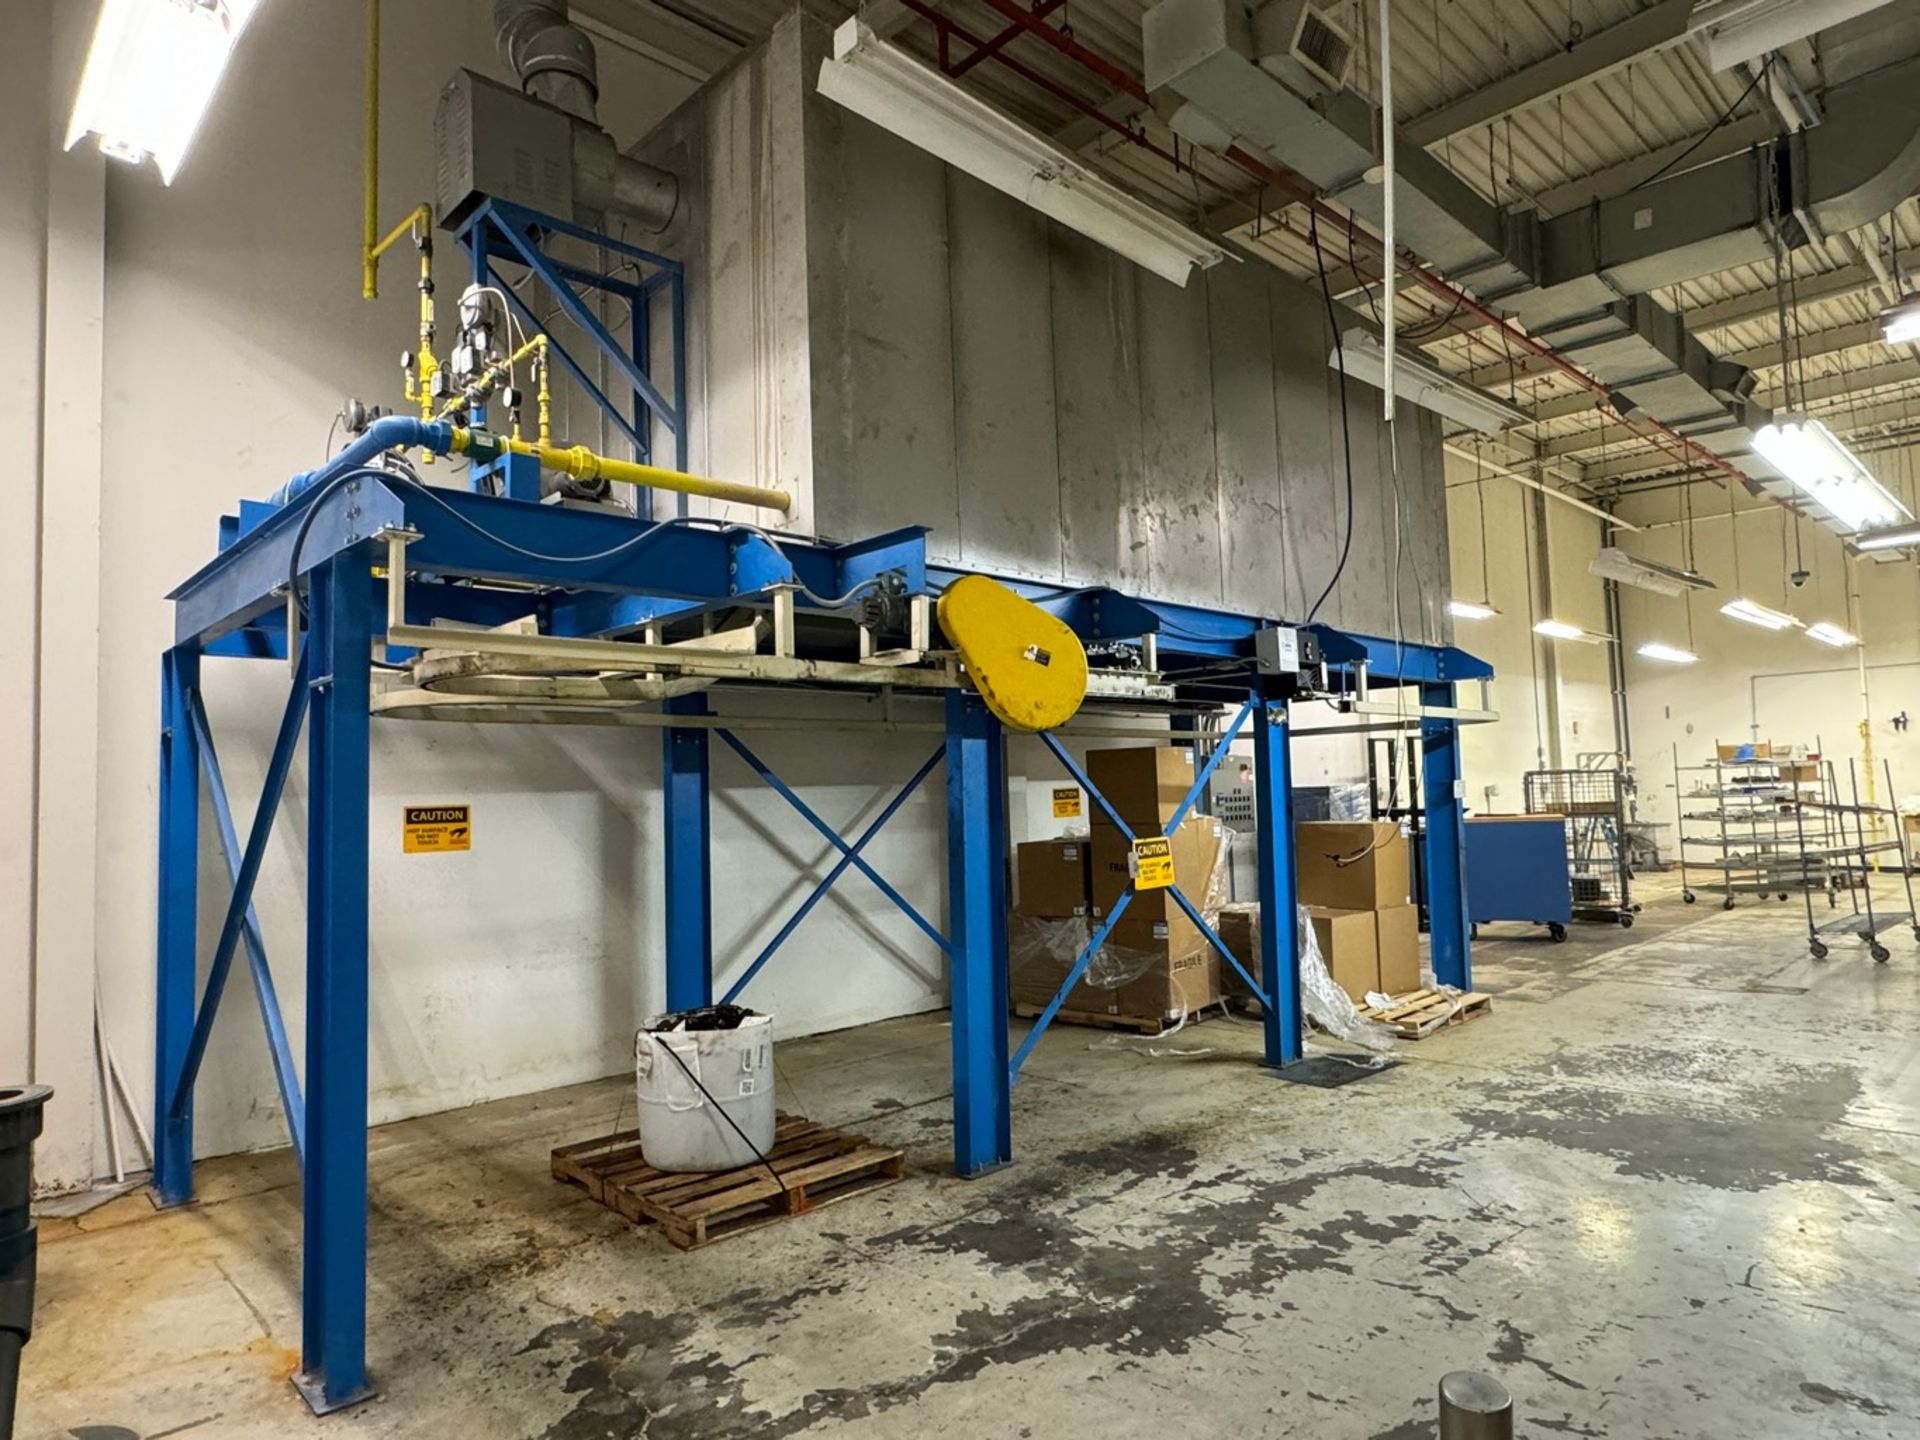 Natural Gas-Fired Paint Curing Oven with Continuous Conveyor Feed - Bild 2 aus 12